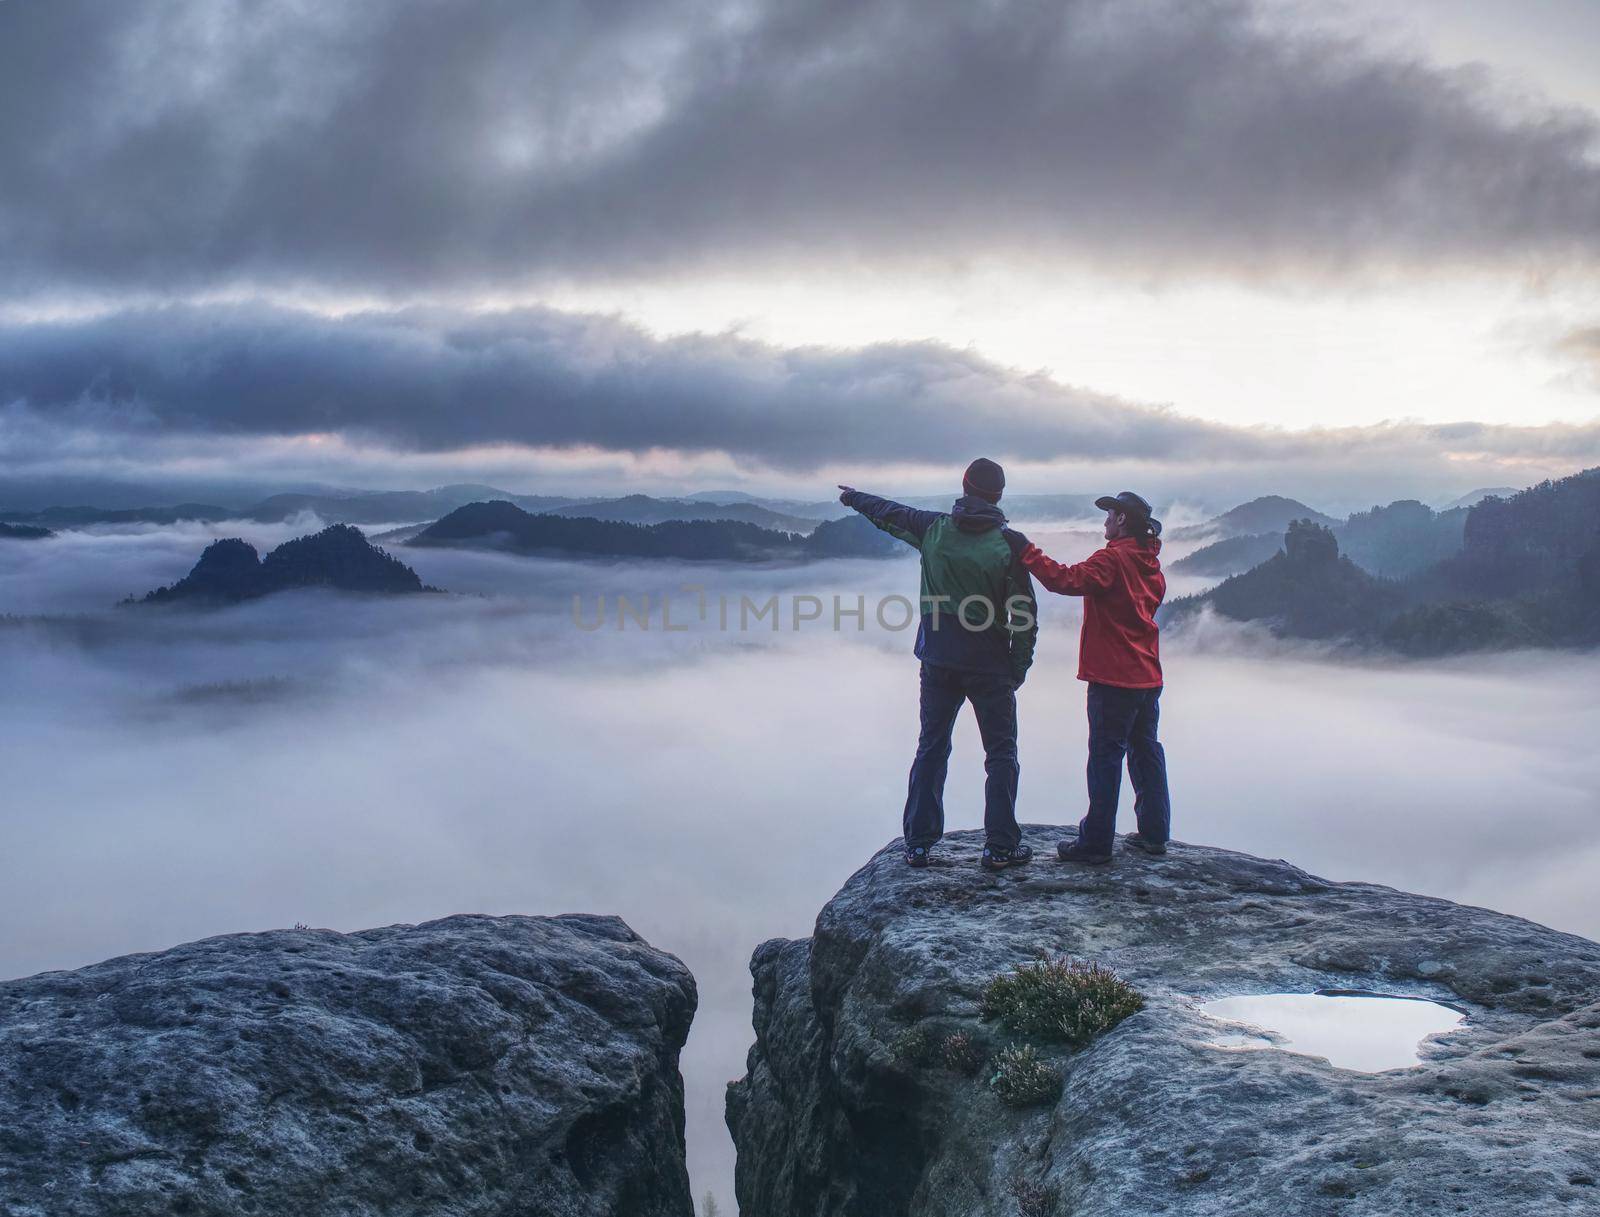 Lovers mirroring in water eye at mountain summit above mist by rdonar2